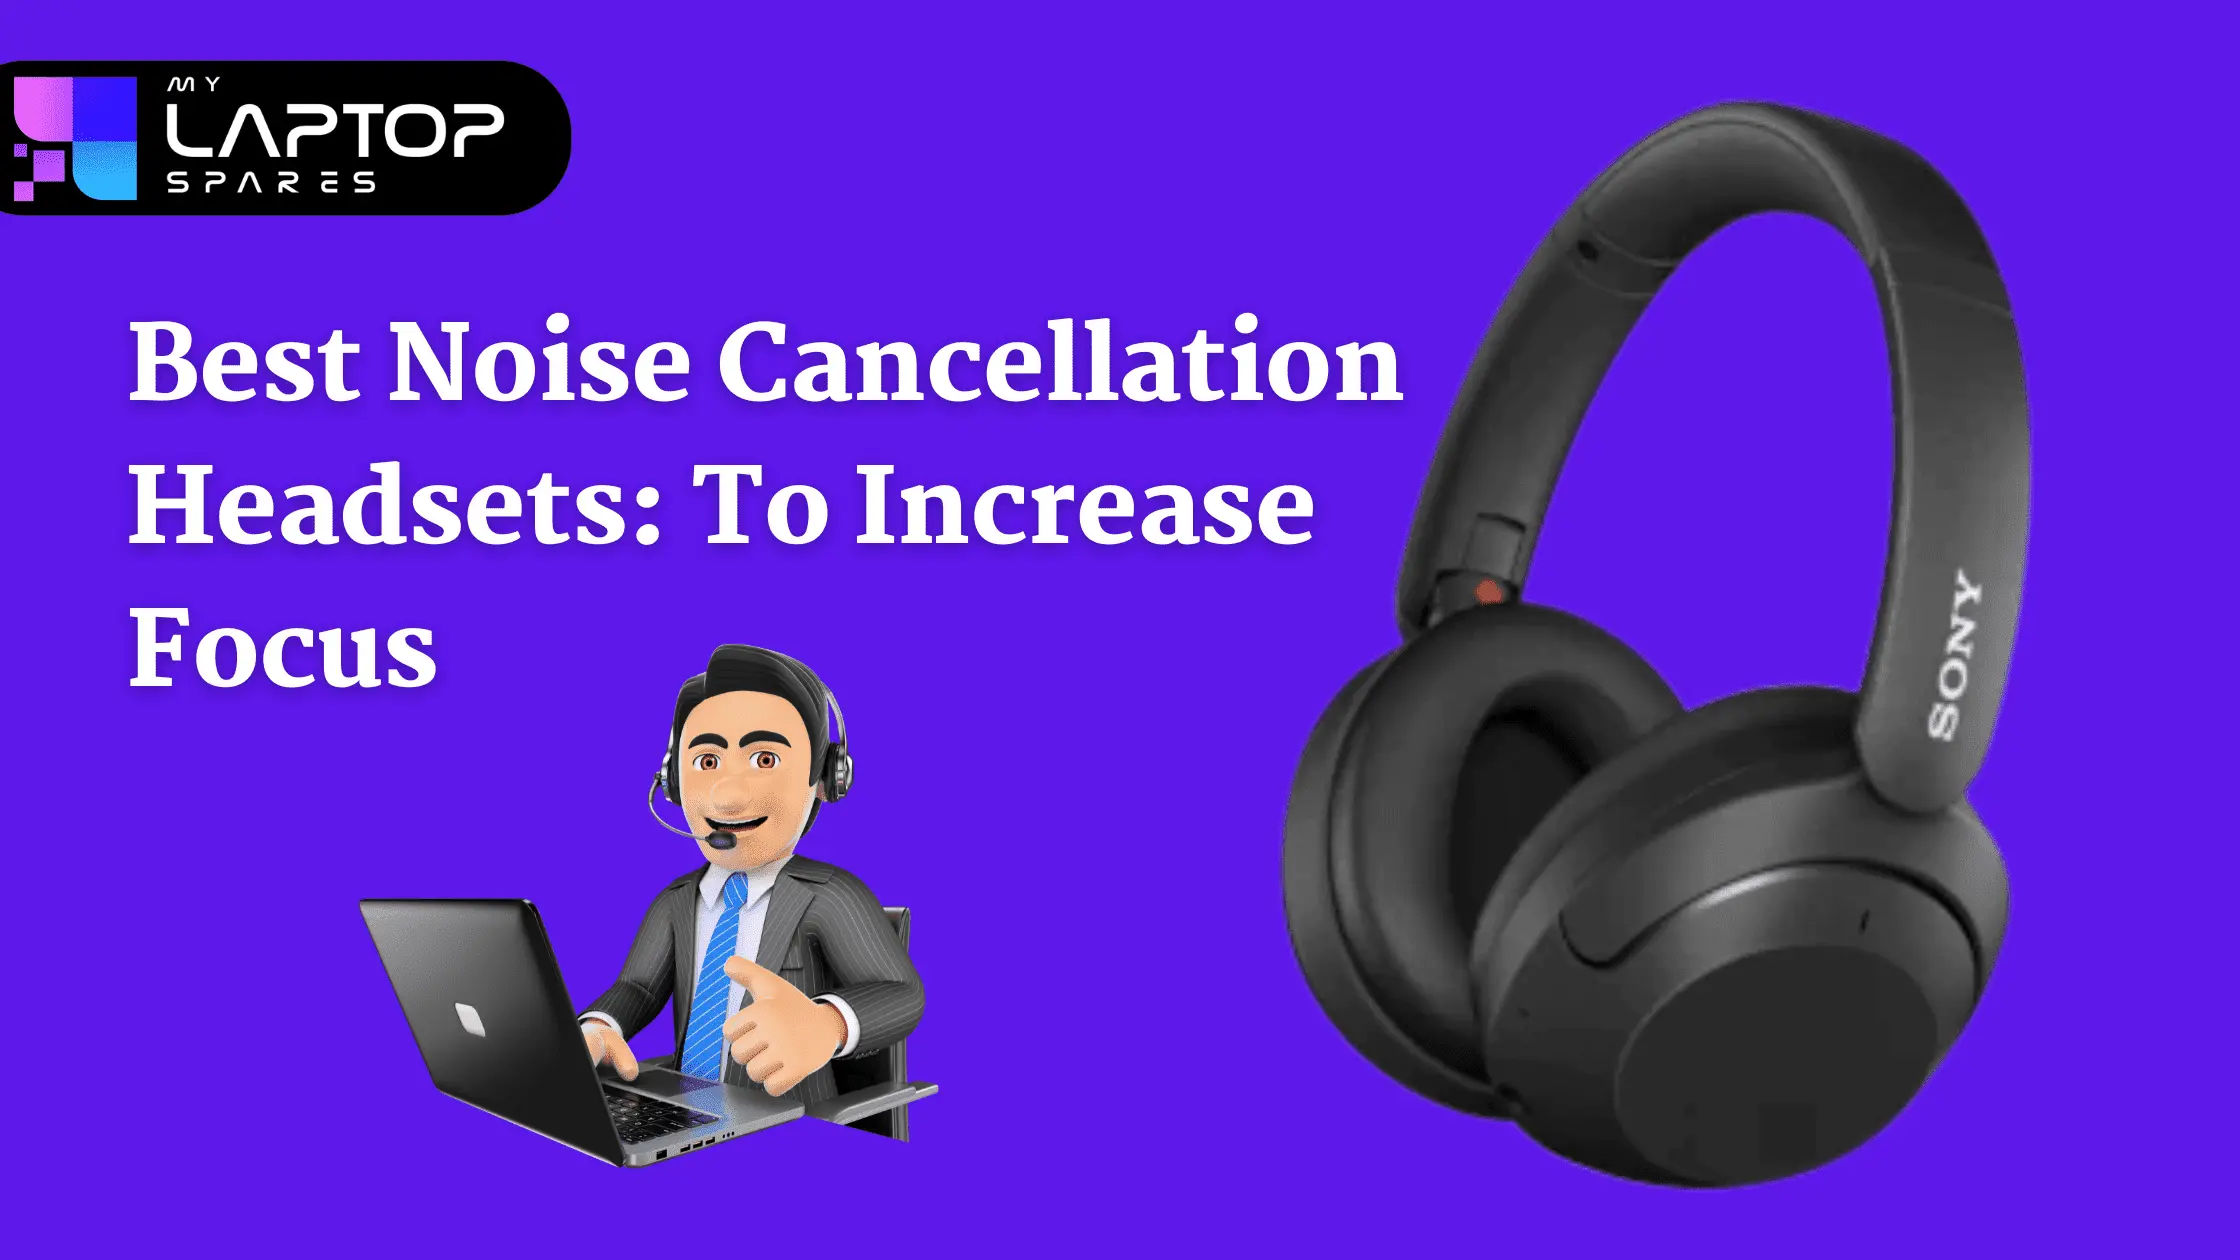 Headsets to Increase Focus: Best Noise Cancellation Headsets